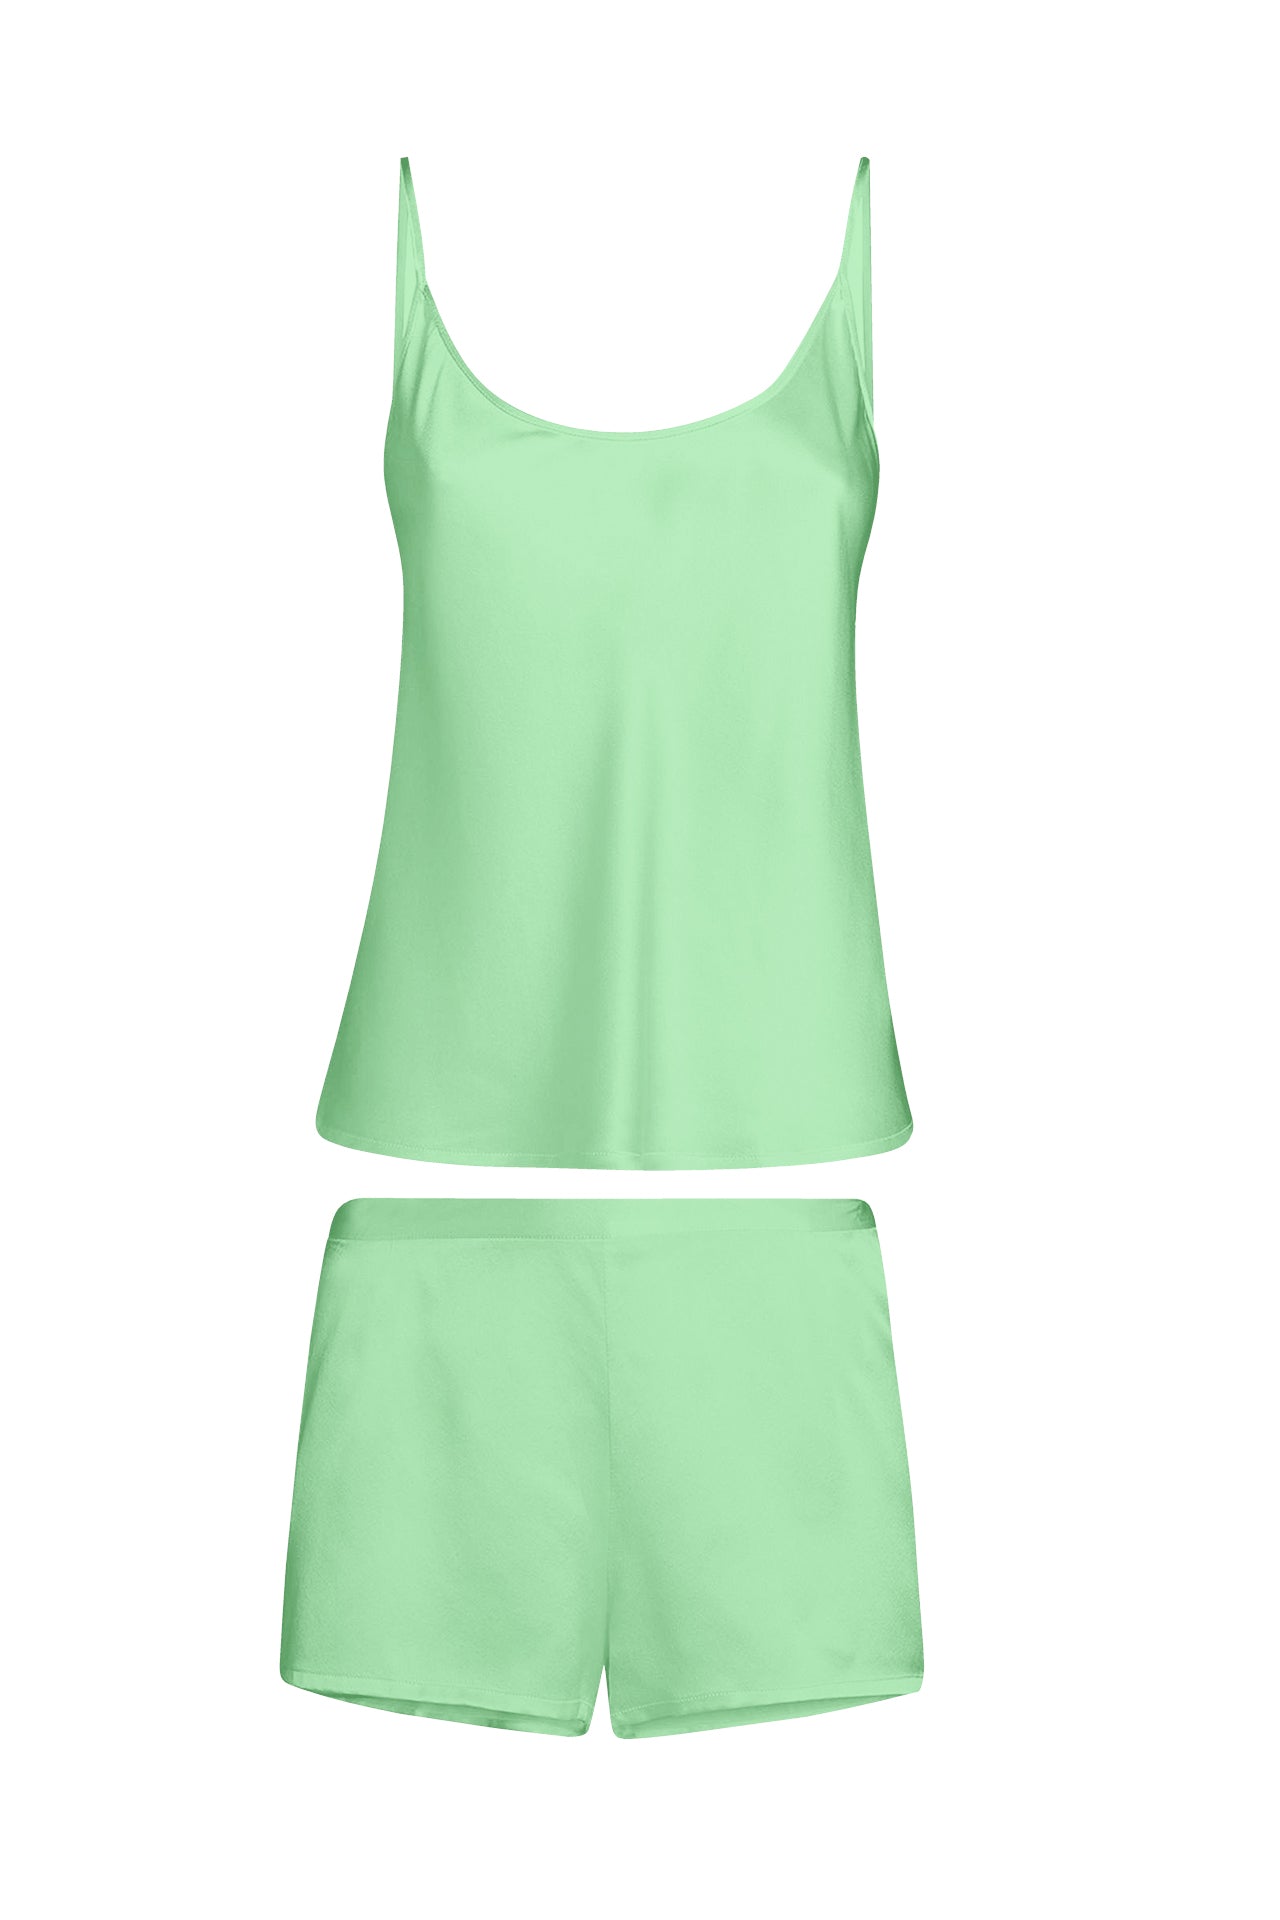 "summer cami tops" "Kyle X Shahida"  "mint green camisole top" "dressy camisole tops"